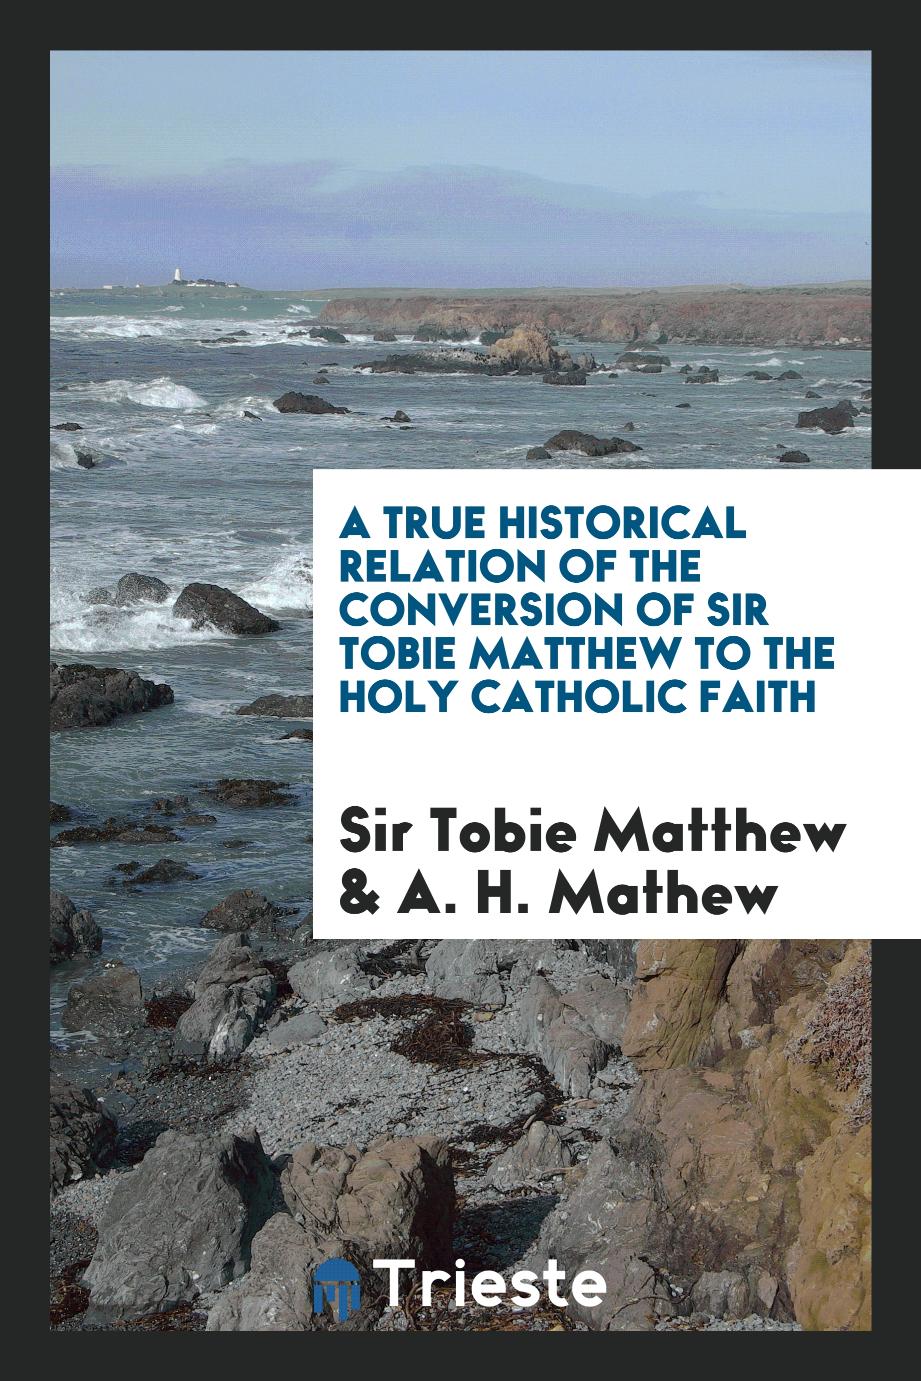 A True Historical Relation of the Conversion of Sir Tobie Matthew to the Holy Catholic Faith